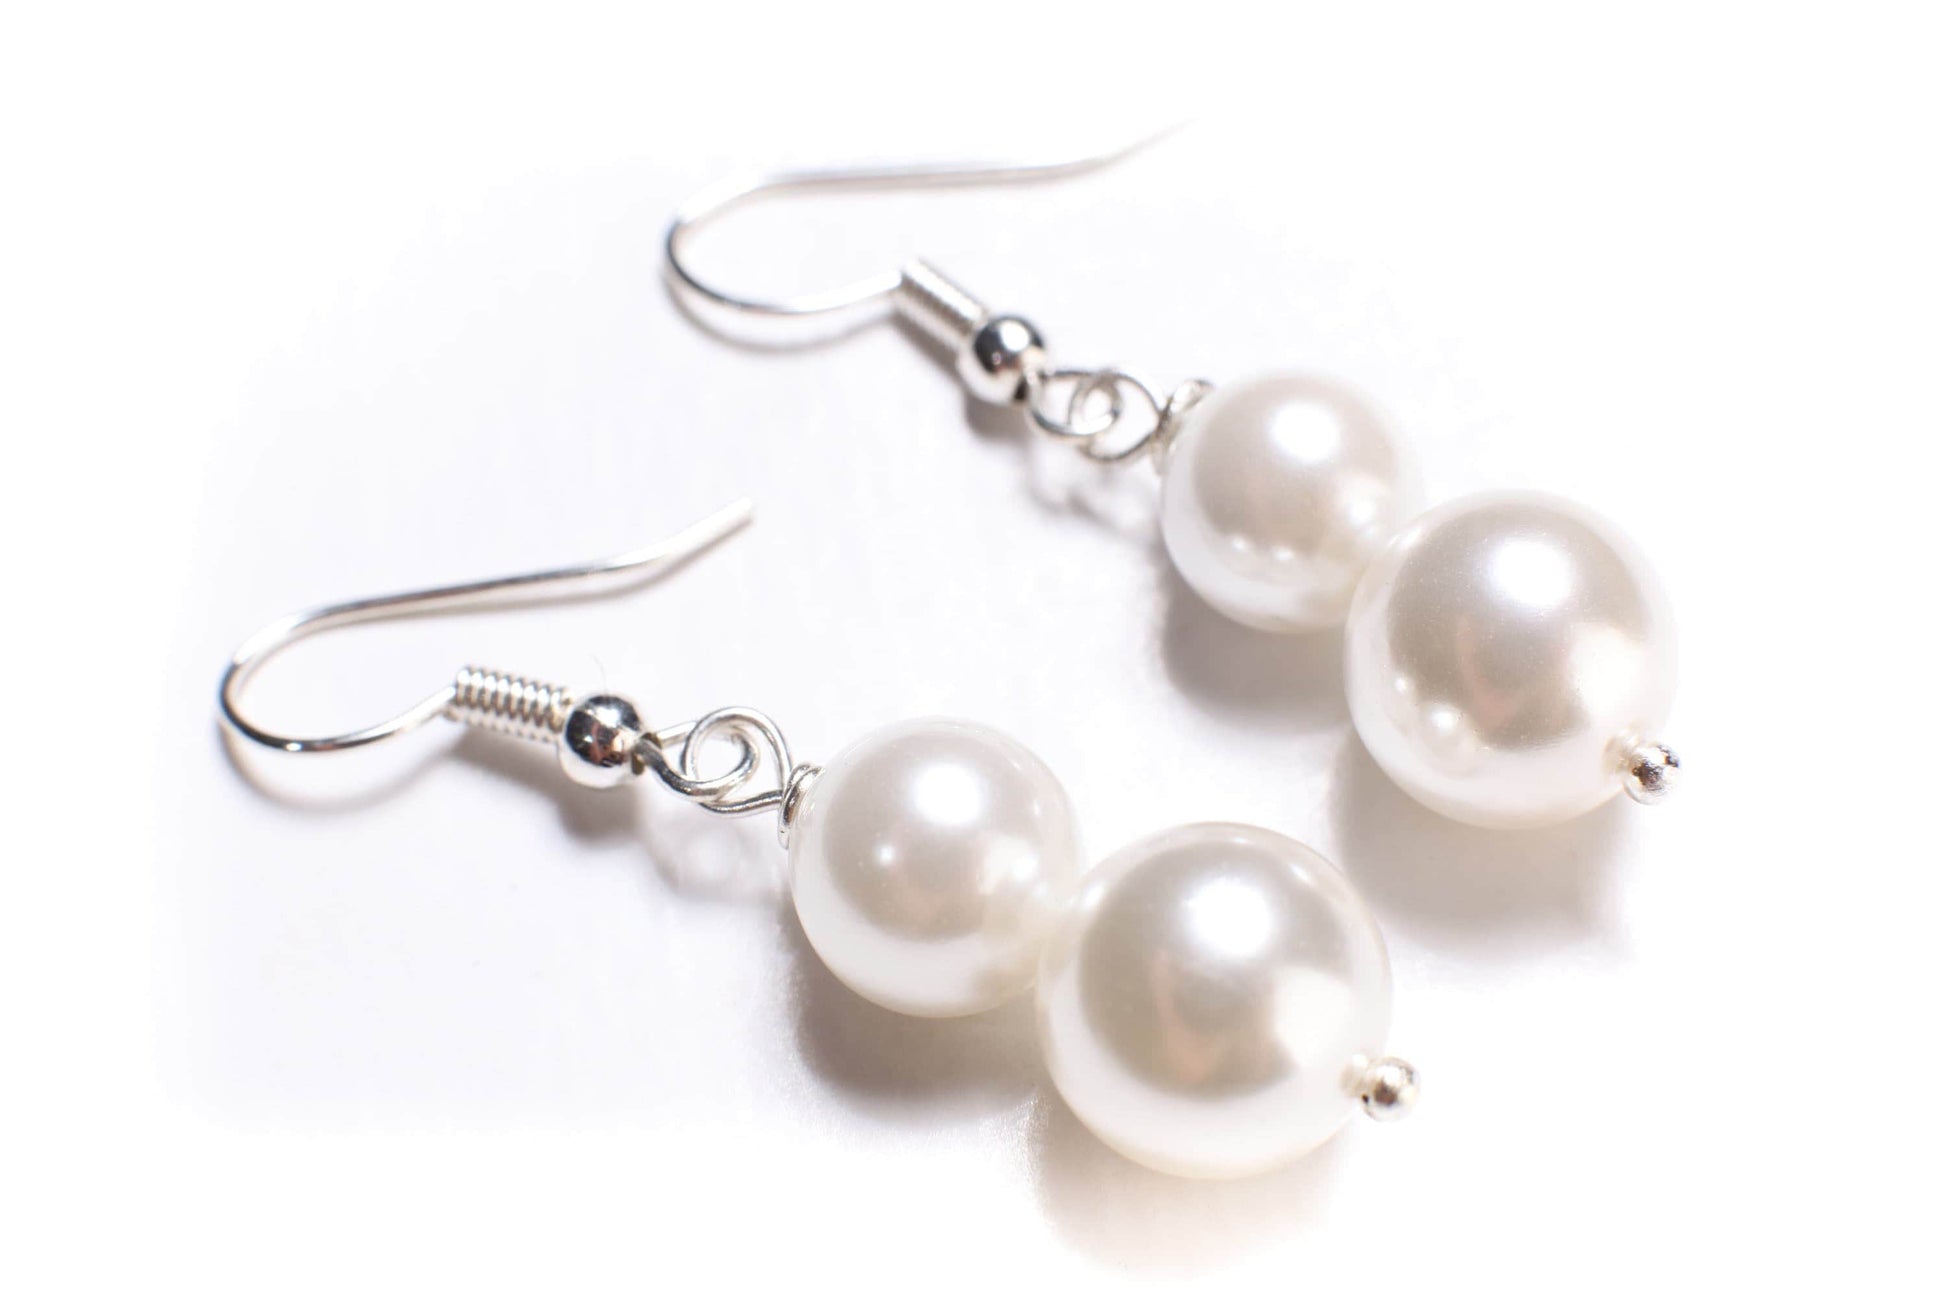 Seashell South Sea Pearl 8mm &10mm Round Dangling Pearl in 925 Sterling Silver Earrings, Bridal, Gift for Her